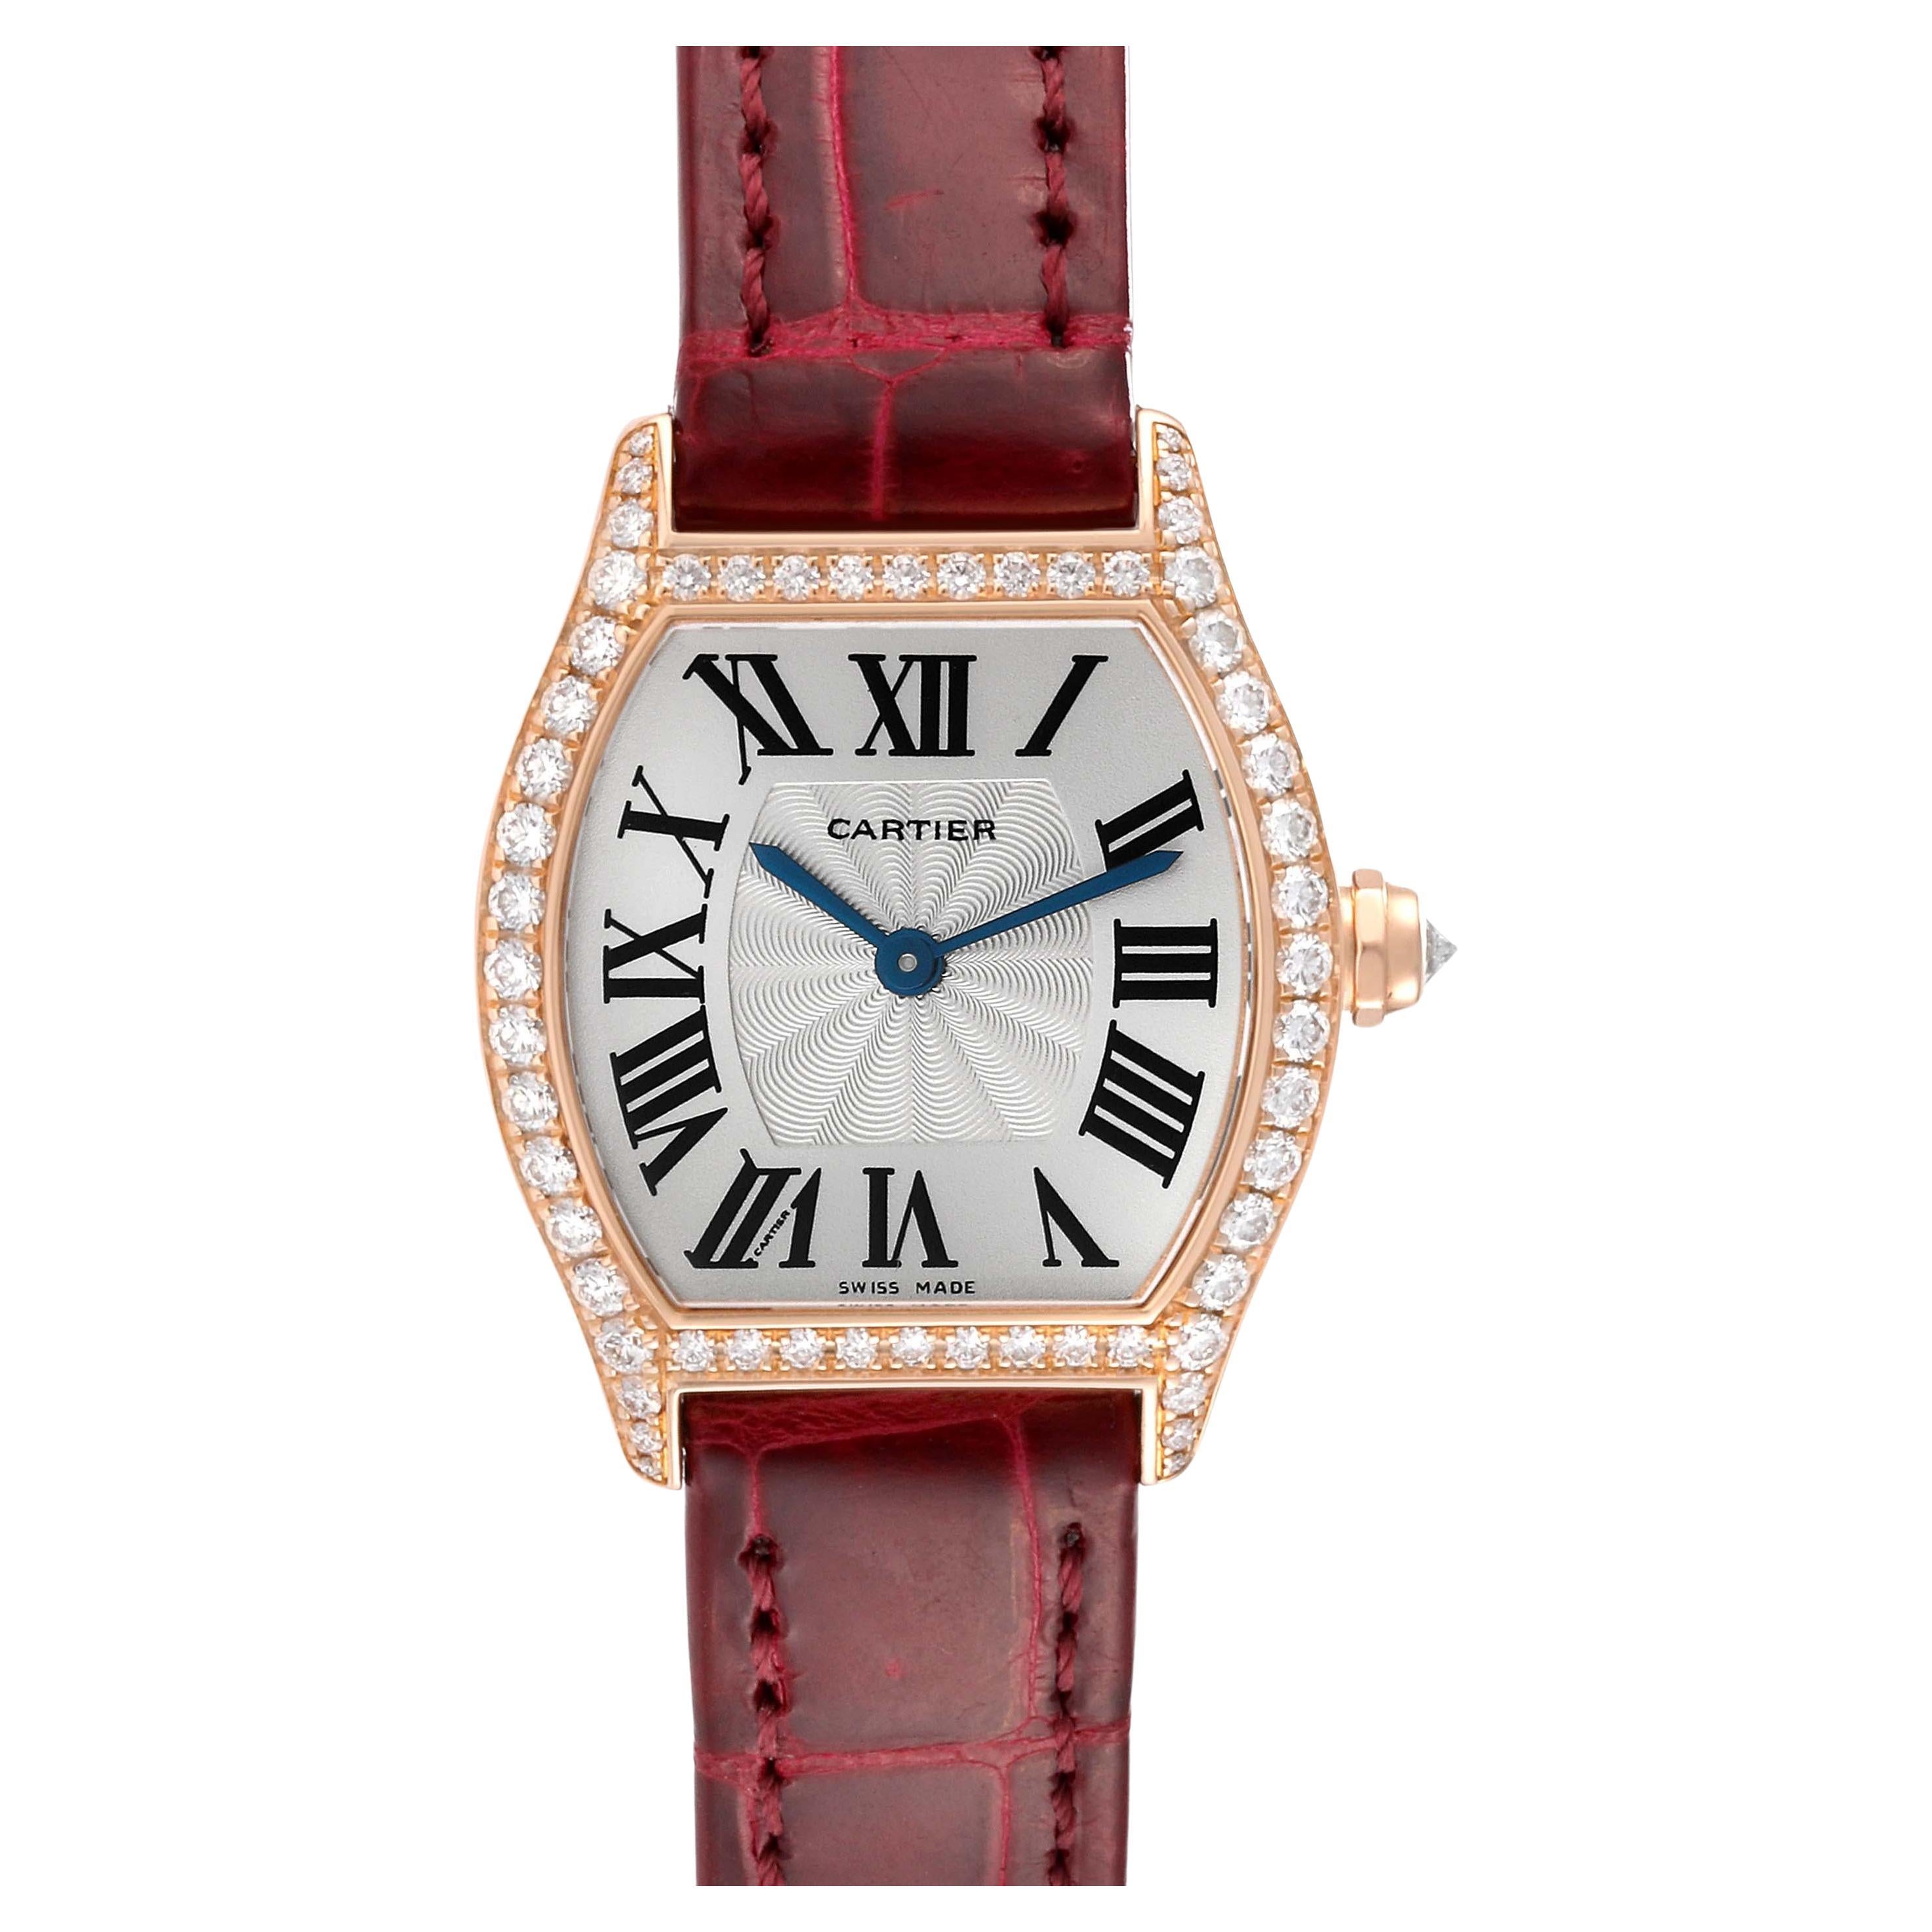 Cartier Tortue Rose Gold Diamond Ladies Watch WA501010 Papers